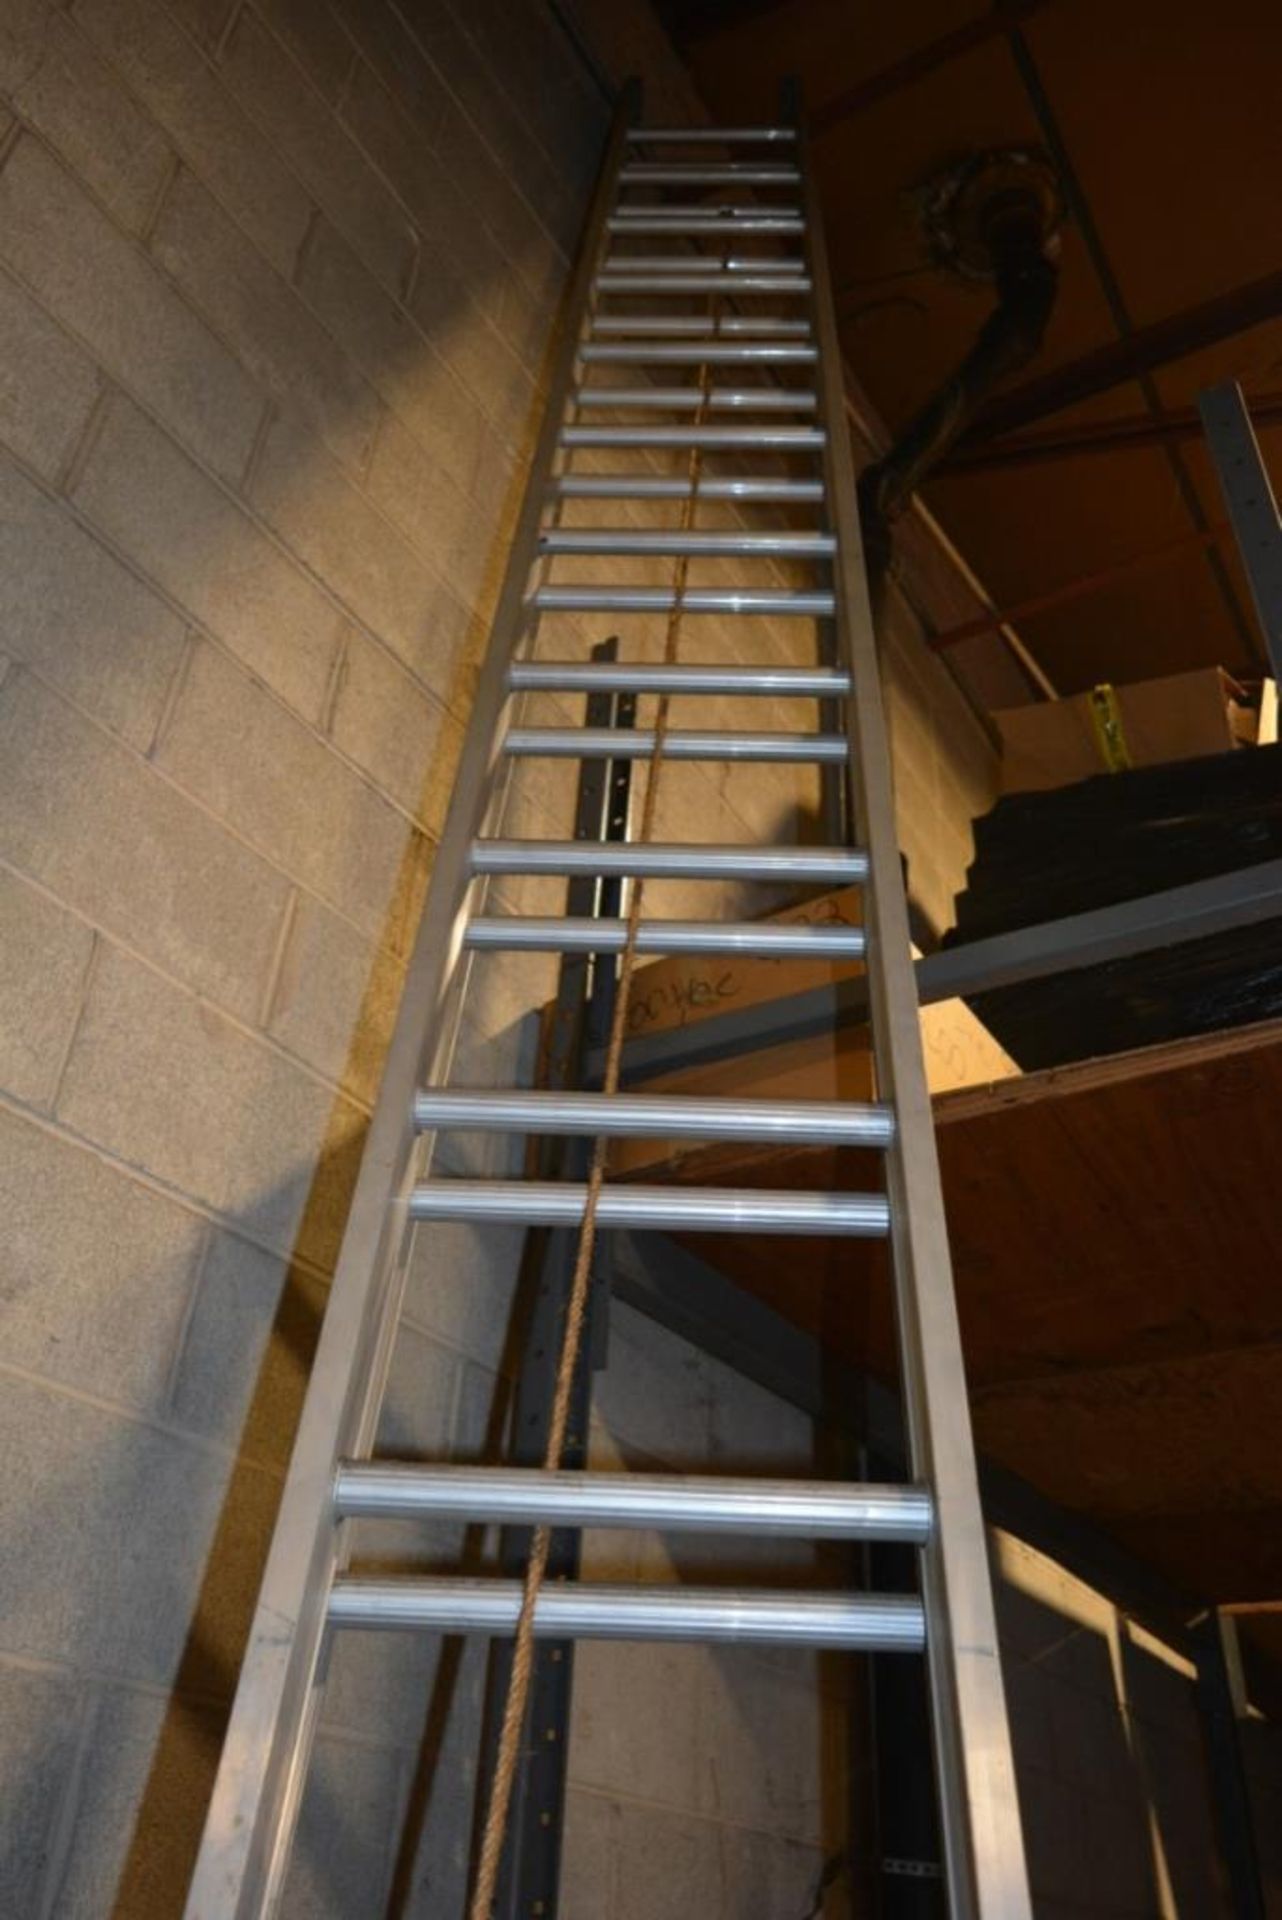 American 30' Aluminum Extention Ladder - Image 4 of 4